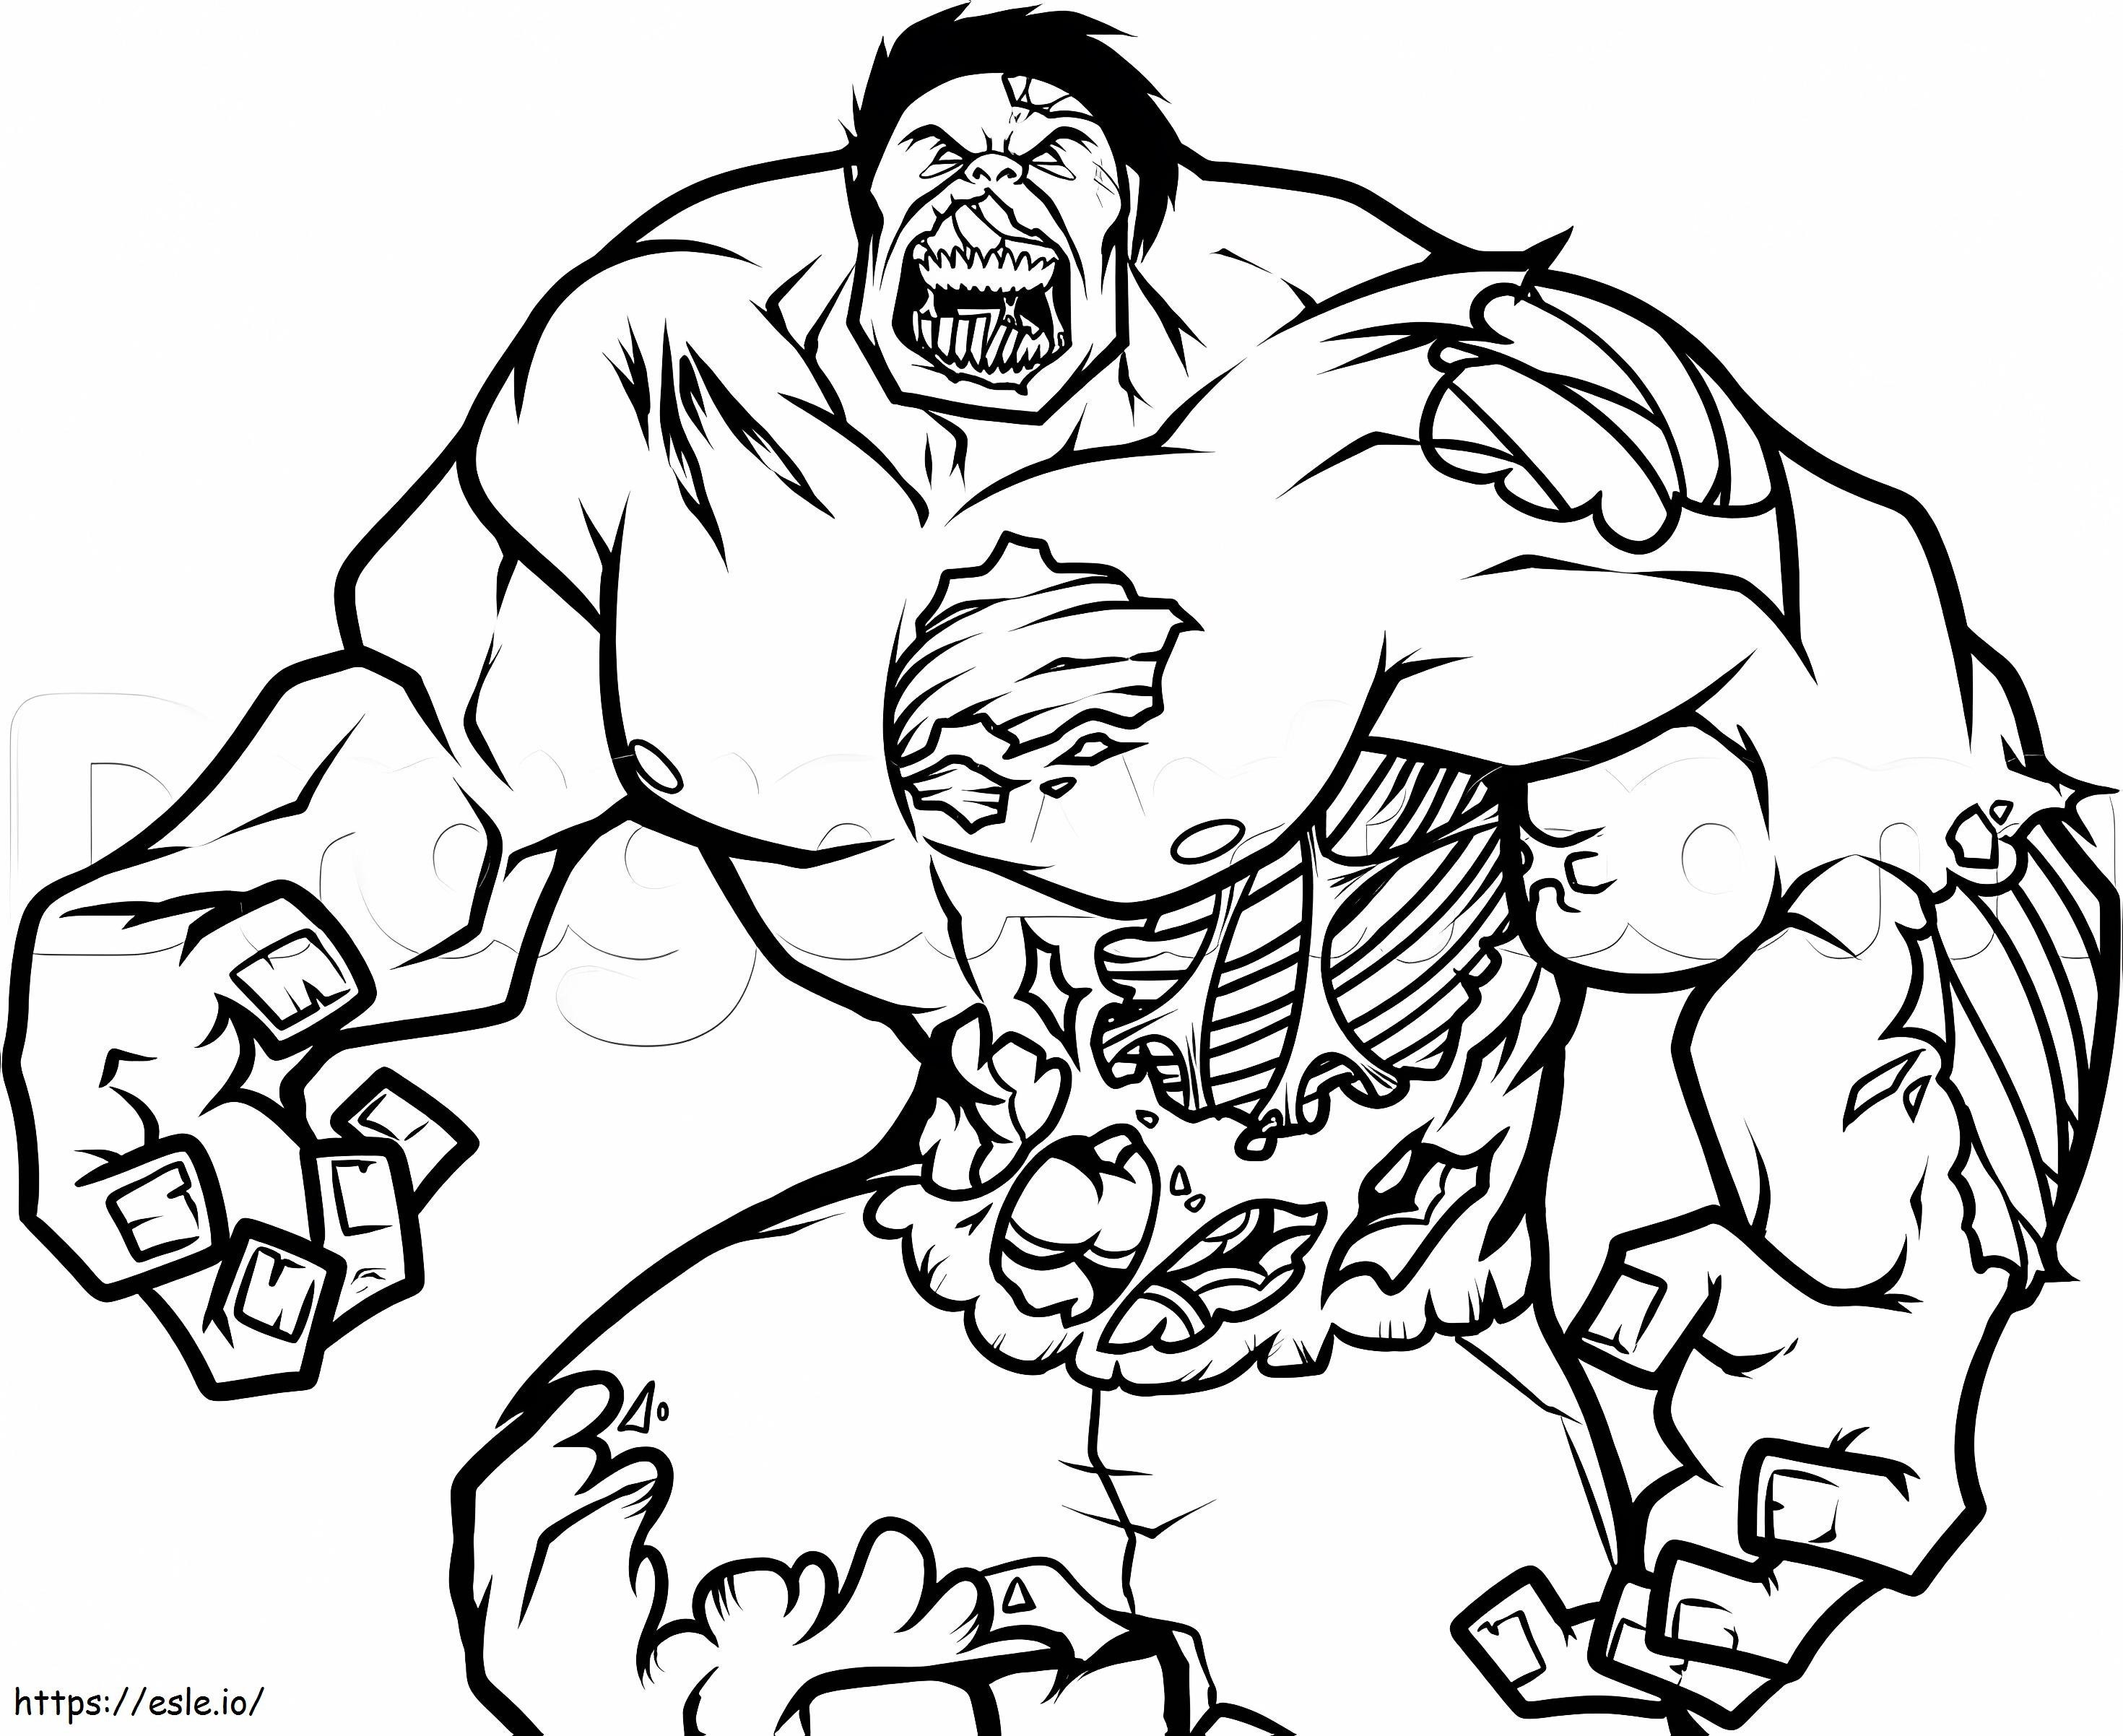 Black Ops Zombies 01 coloring page